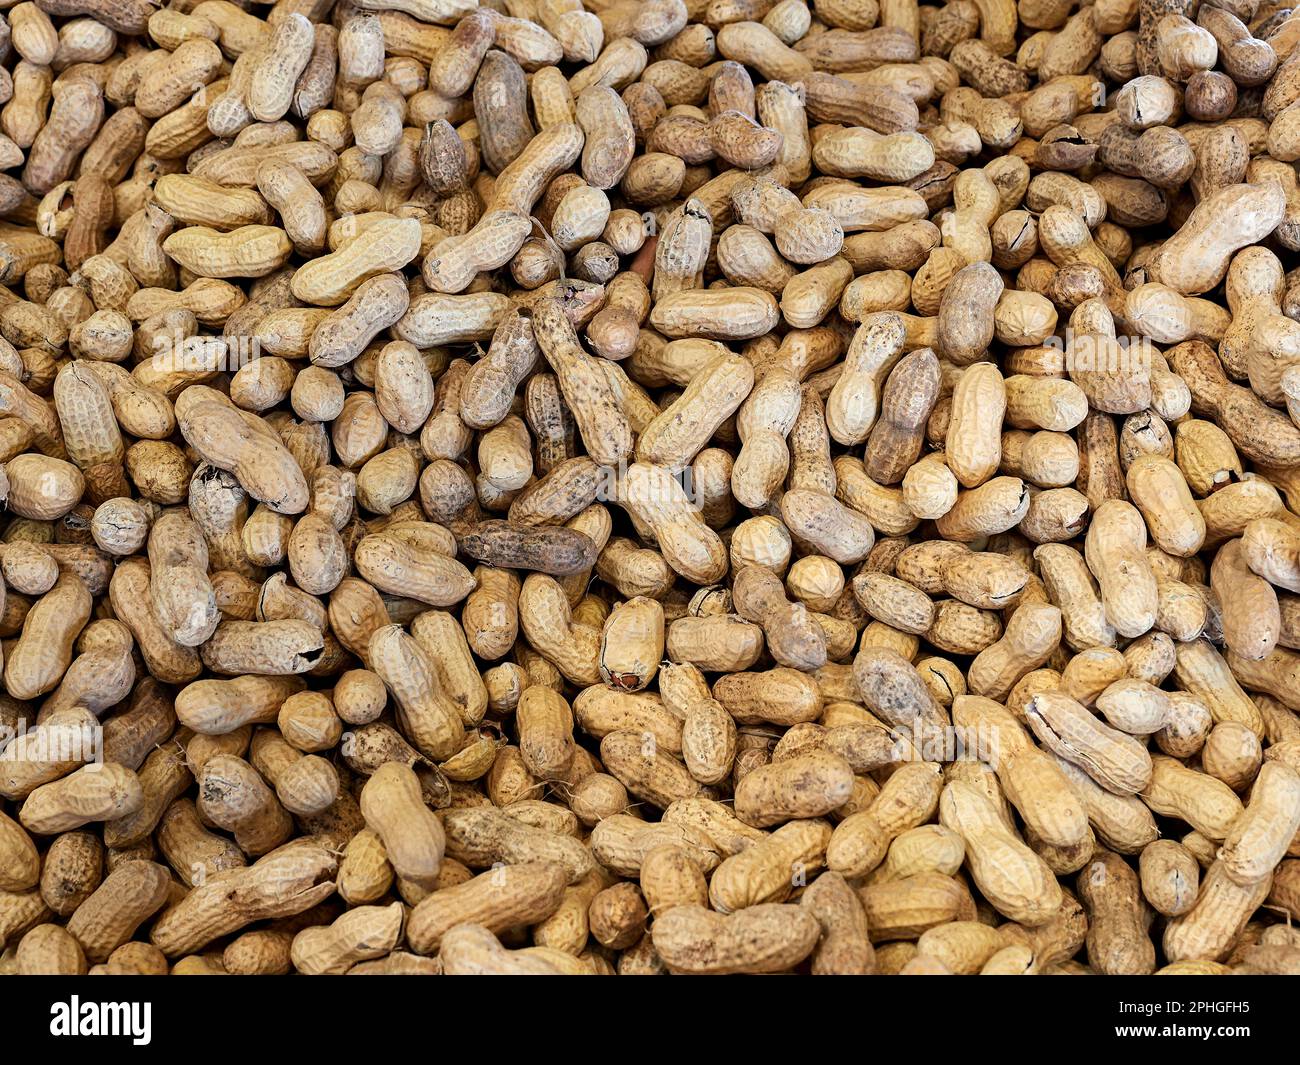 Fresh whole peanuts in peanut shells for sale at a farm market in Montgomery Alabama, USA. Stock Photo